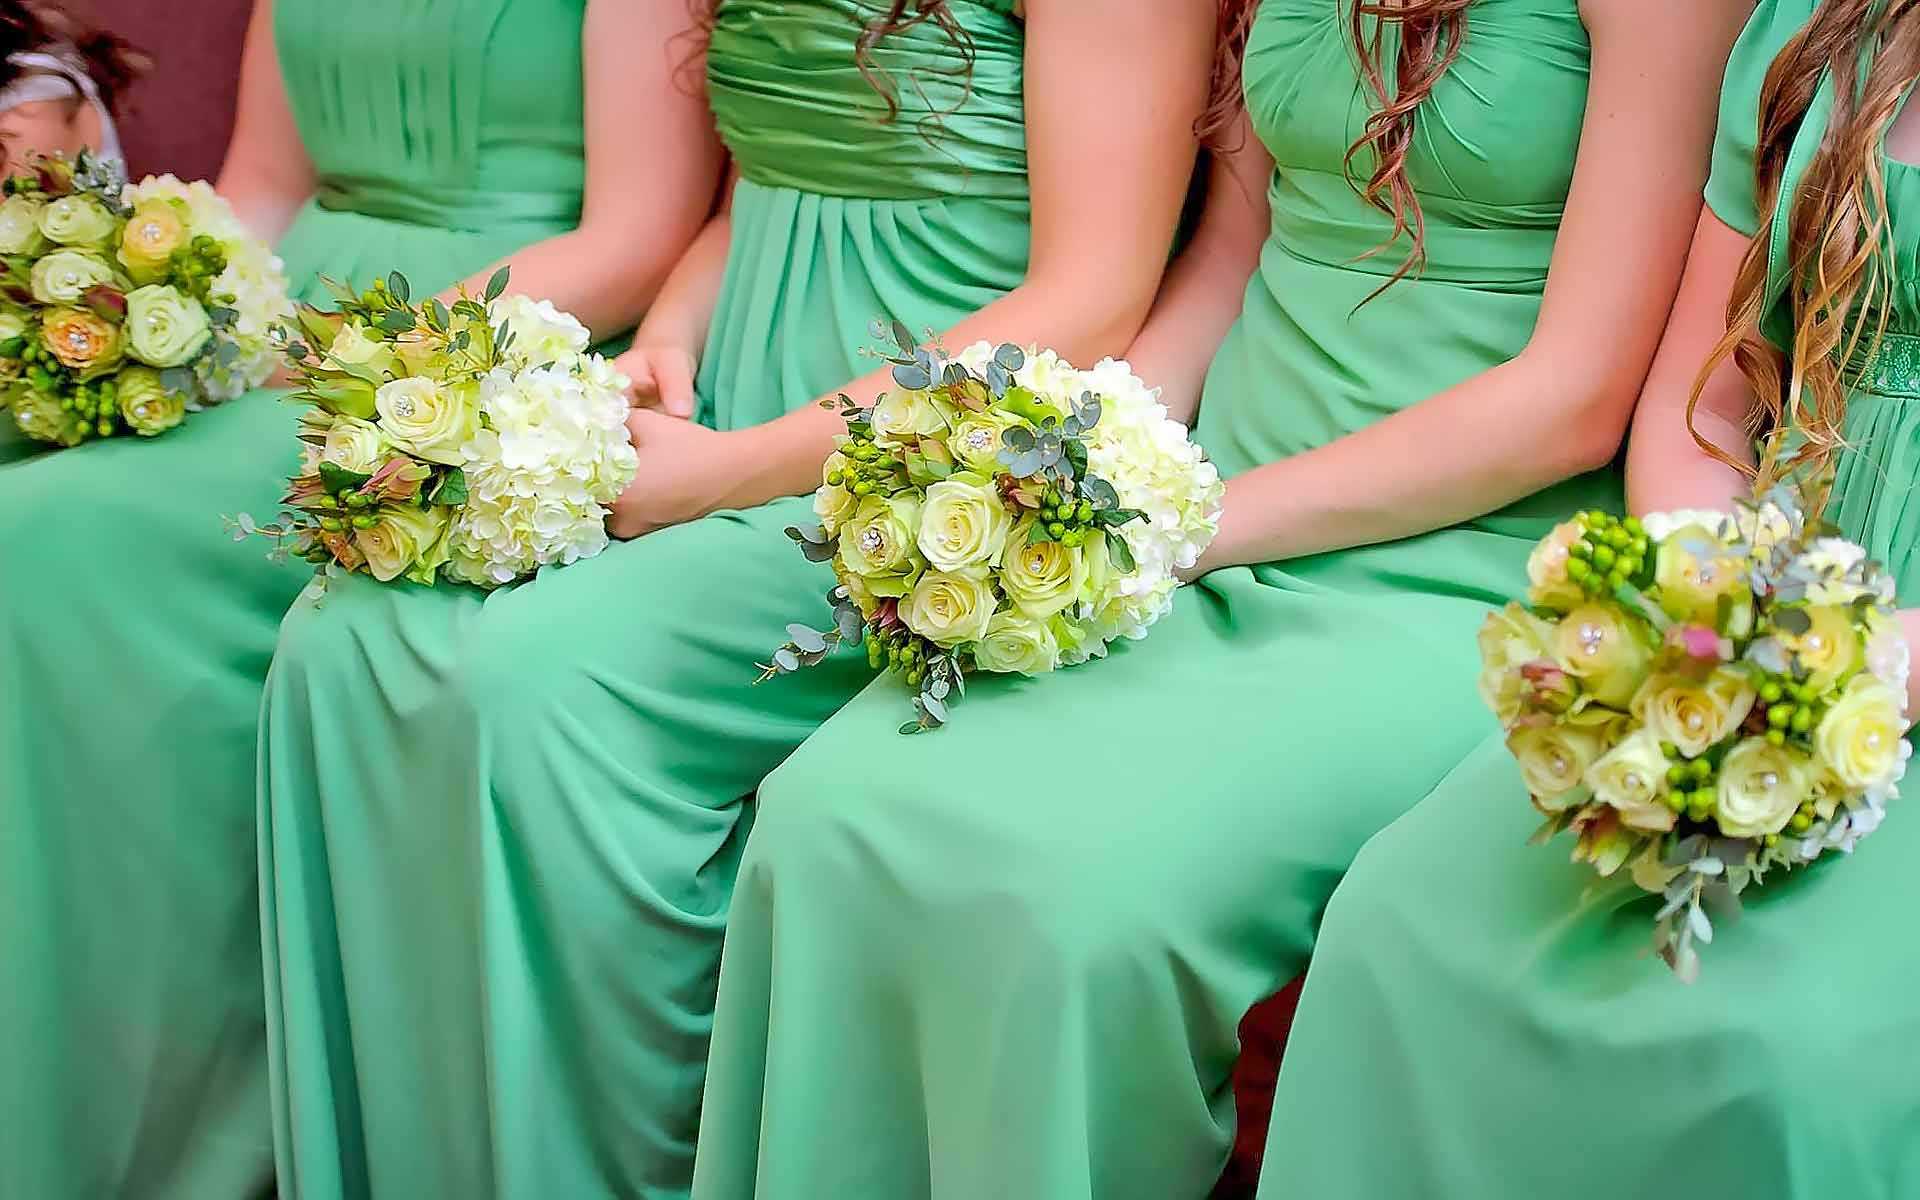 Ladies-In-Emerald-Each-Dressed-Up-Holding-Their-Wedding-Bouquets